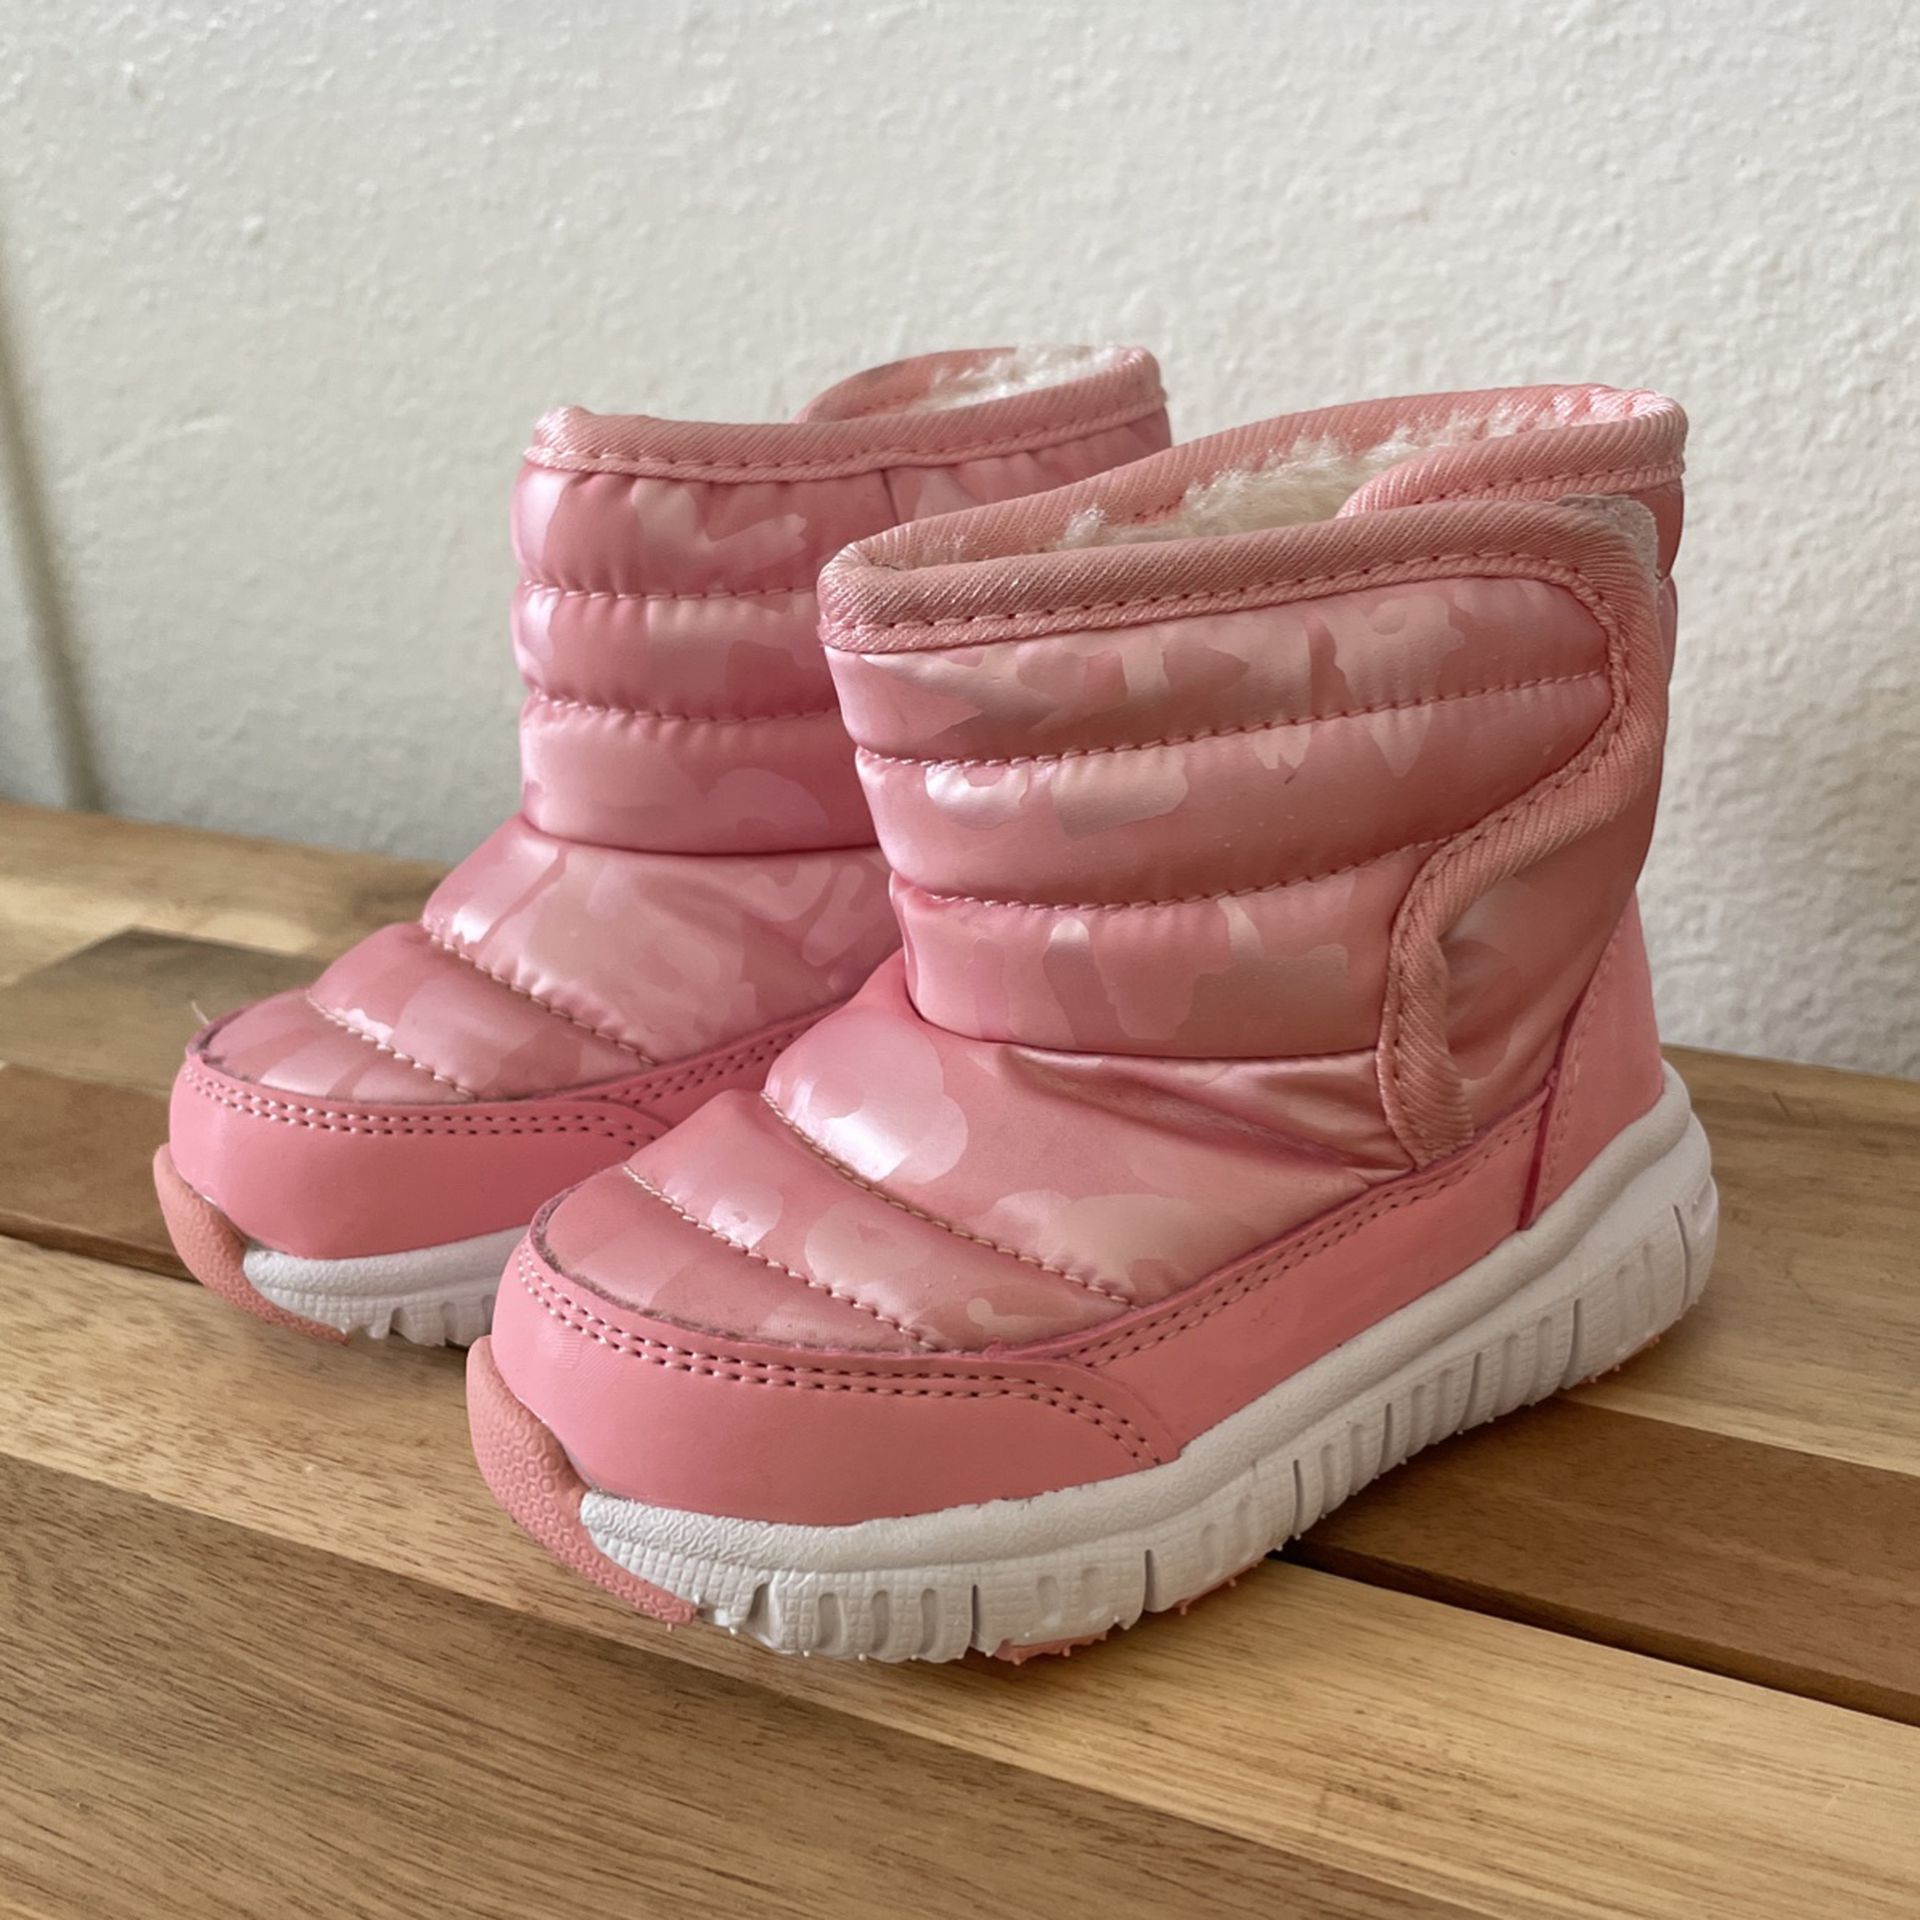 New snow boots Size 5T — worn for 30 mins max!